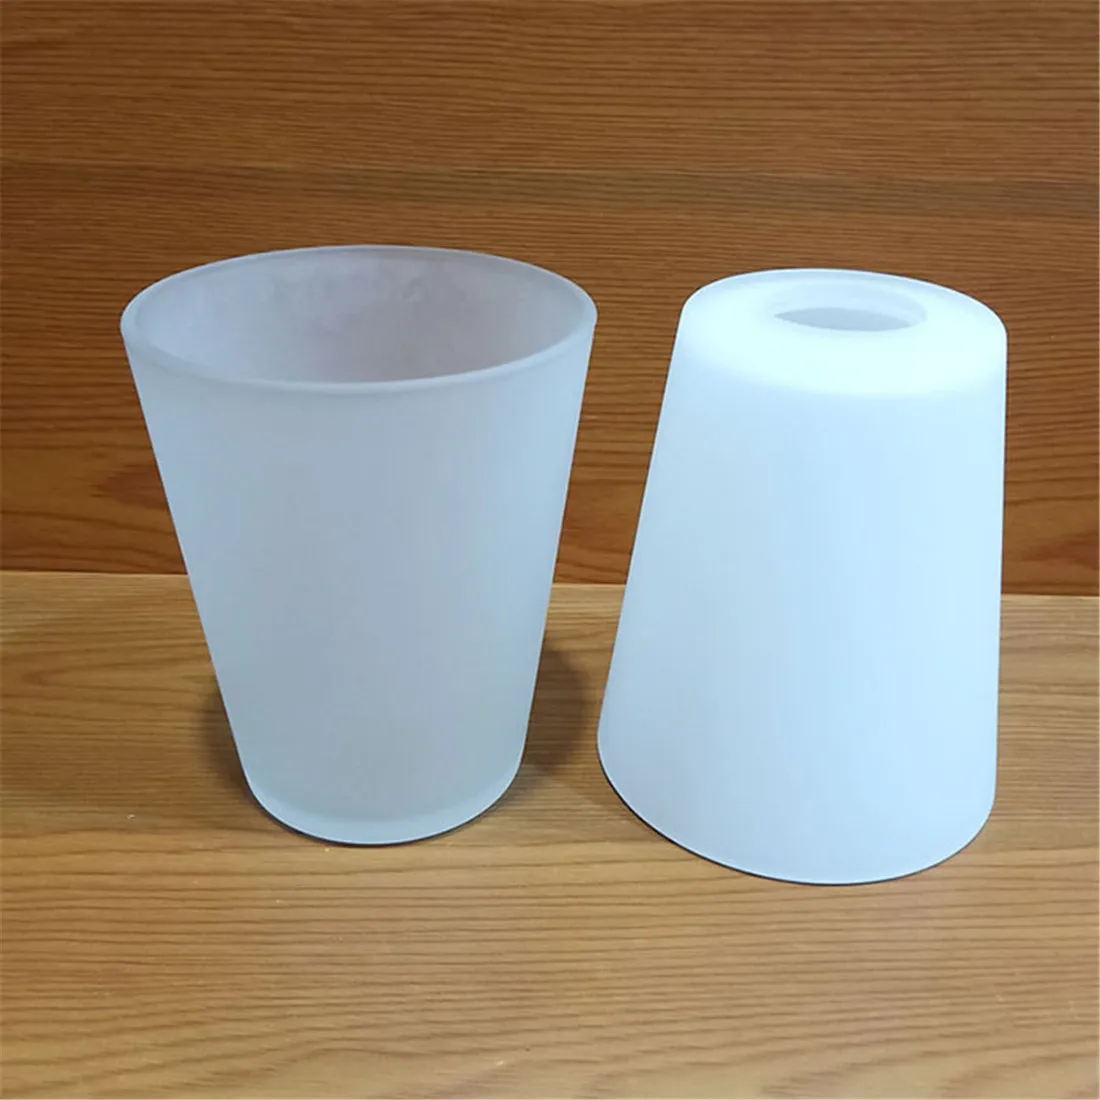 Opening D4.2cm Cone Glass Lamp Shade White Frosted Glass Cover Replacements for E27 Screw Bulb Pendant Lighting Fixtures